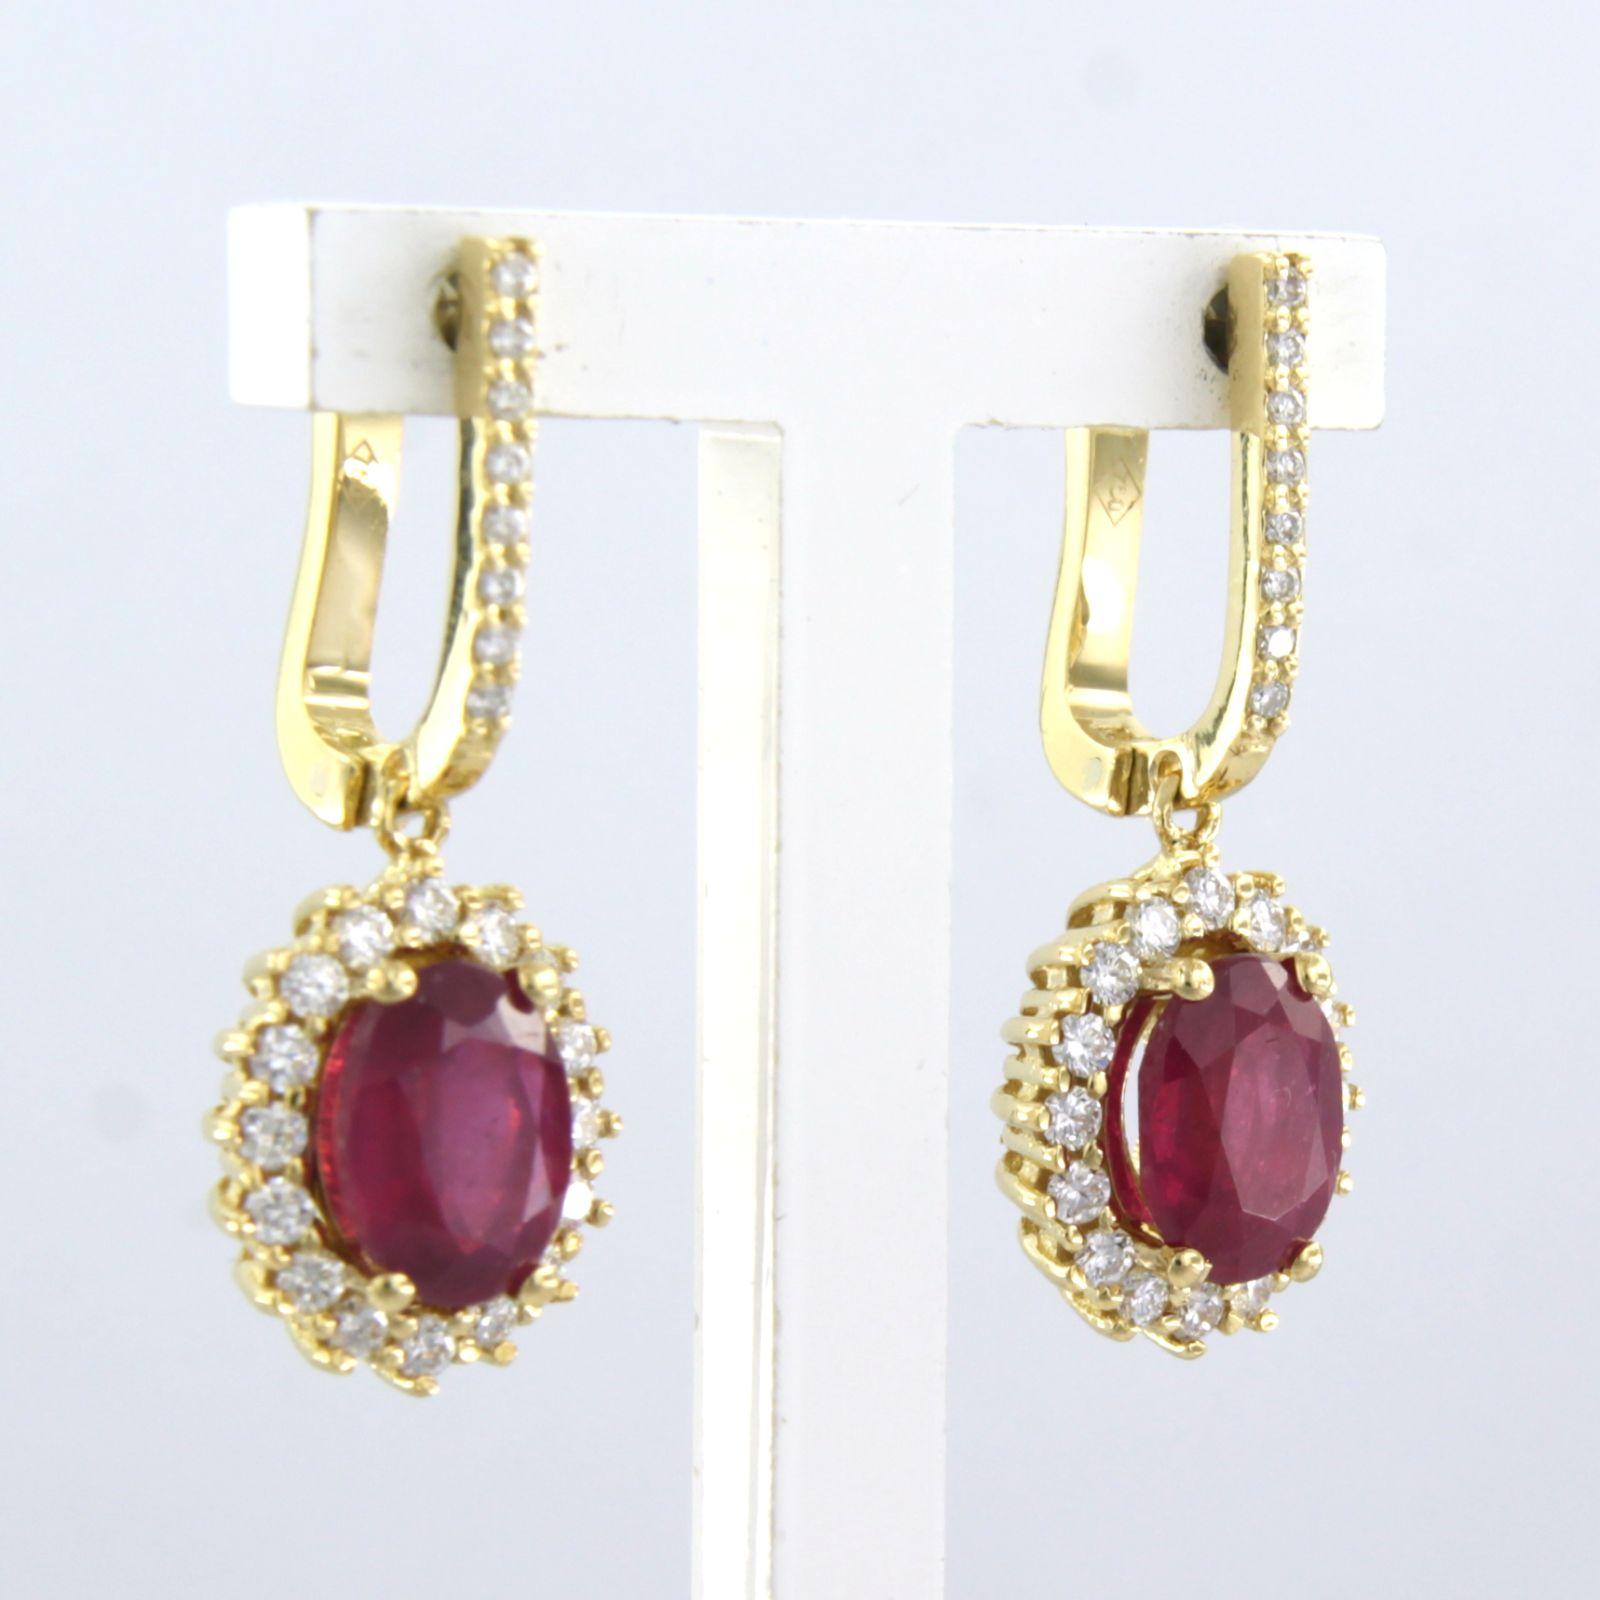 Modern 18k gold earrings with ruby to. 3.40ct and brilliant cut diamonds up to.0.64ct For Sale